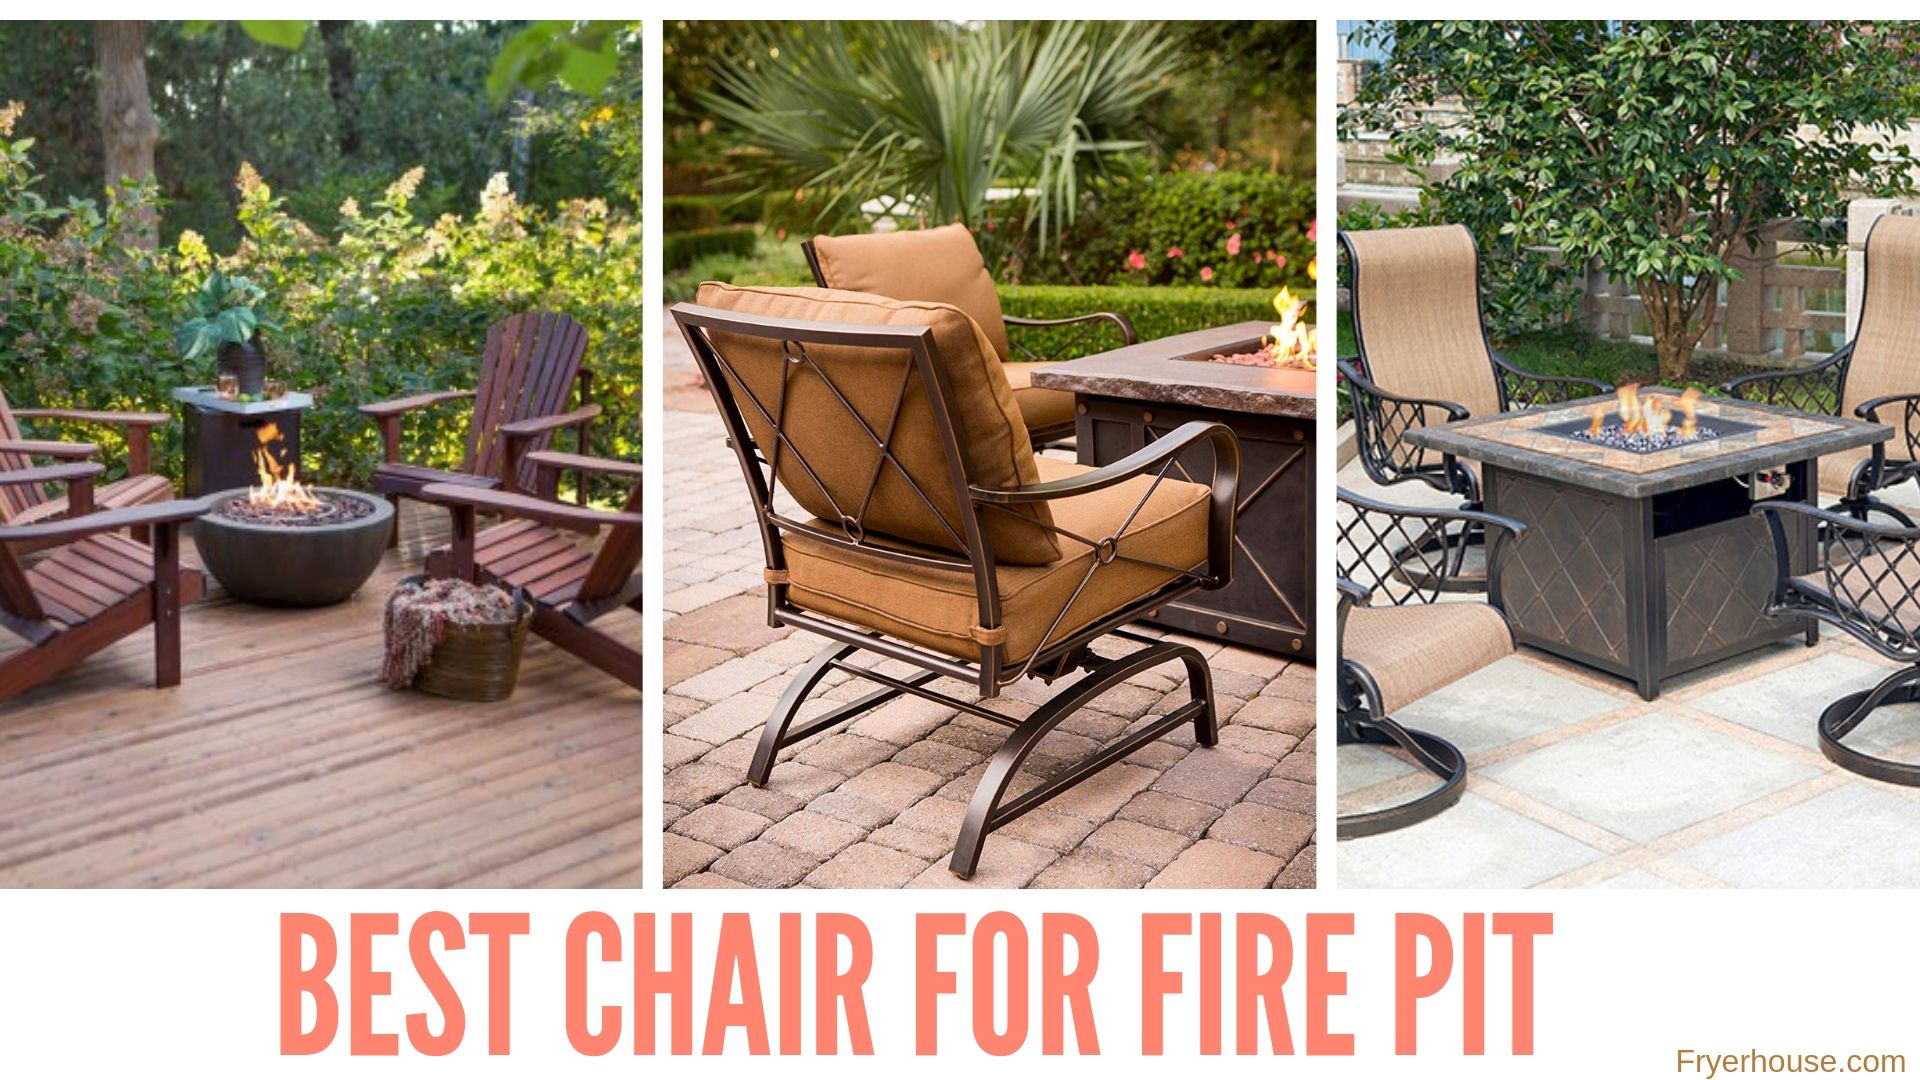 10 Best Chairs for Fire Pit You Can Buy in 2019